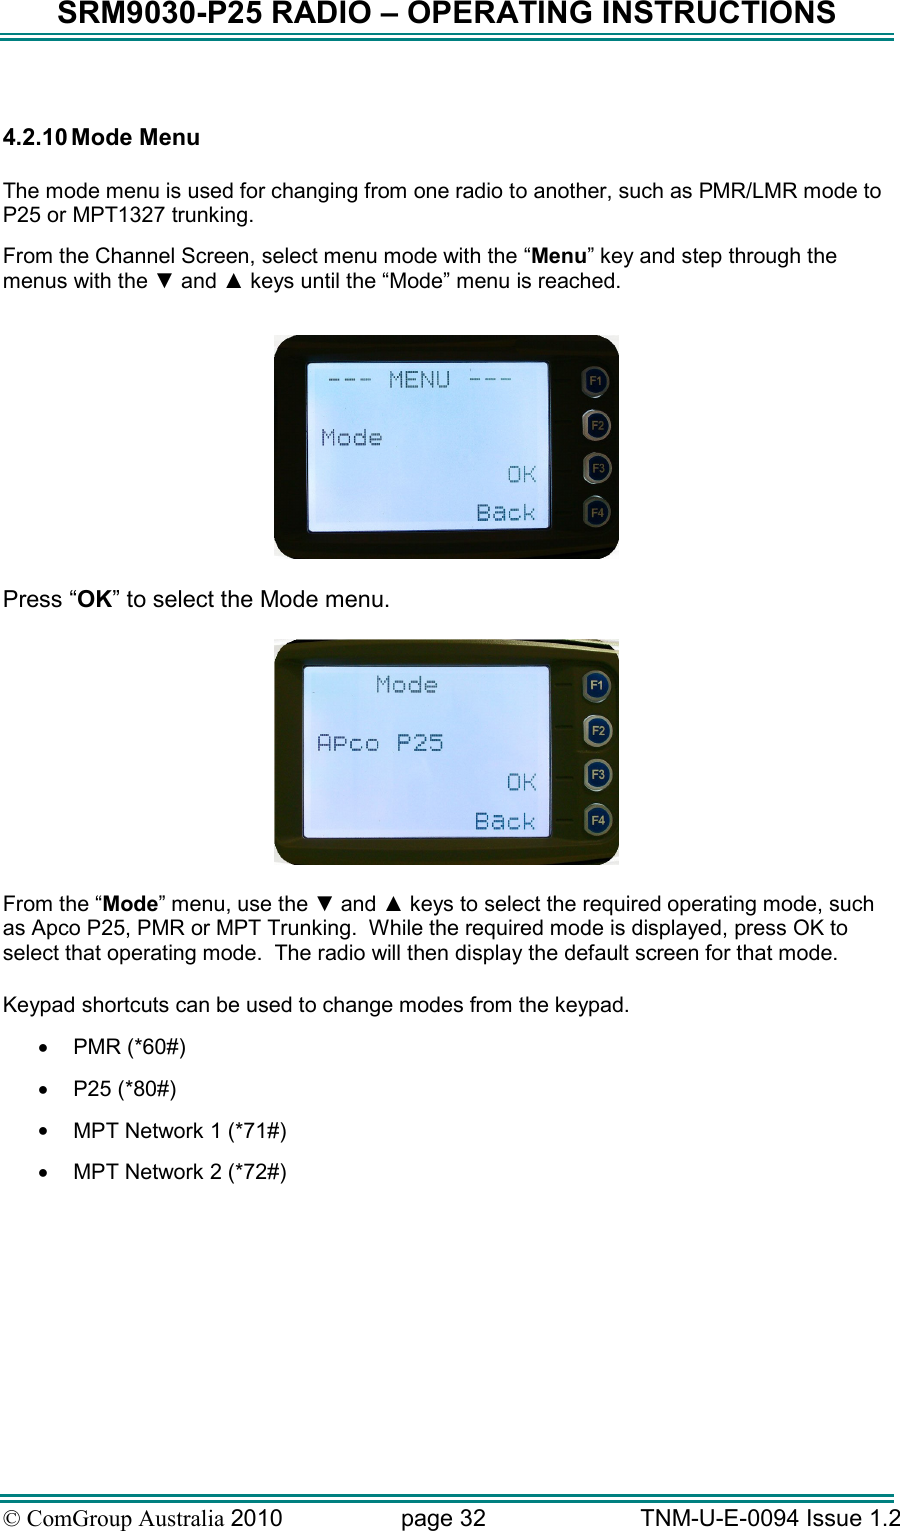 SRM9030-P25 RADIO – OPERATING INSTRUCTIONS © ComGroup Australia 2010  page 32   TNM-U-E-0094 Issue 1.2  4.2.10 Mode Menu  The mode menu is used for changing from one radio to another, such as PMR/LMR mode to P25 or MPT1327 trunking. From the Channel Screen, select menu mode with the “Menu” key and step through the menus with the ▼ and ▲ keys until the “Mode” menu is reached.    Press “OK” to select the Mode menu.    From the “Mode” menu, use the ▼ and ▲ keys to select the required operating mode, such as Apco P25, PMR or MPT Trunking.  While the required mode is displayed, press OK to select that operating mode.  The radio will then display the default screen for that mode.  Keypad shortcuts can be used to change modes from the keypad.   •  PMR (*60#) •  P25 (*80#) •  MPT Network 1 (*71#) •  MPT Network 2 (*72#) 